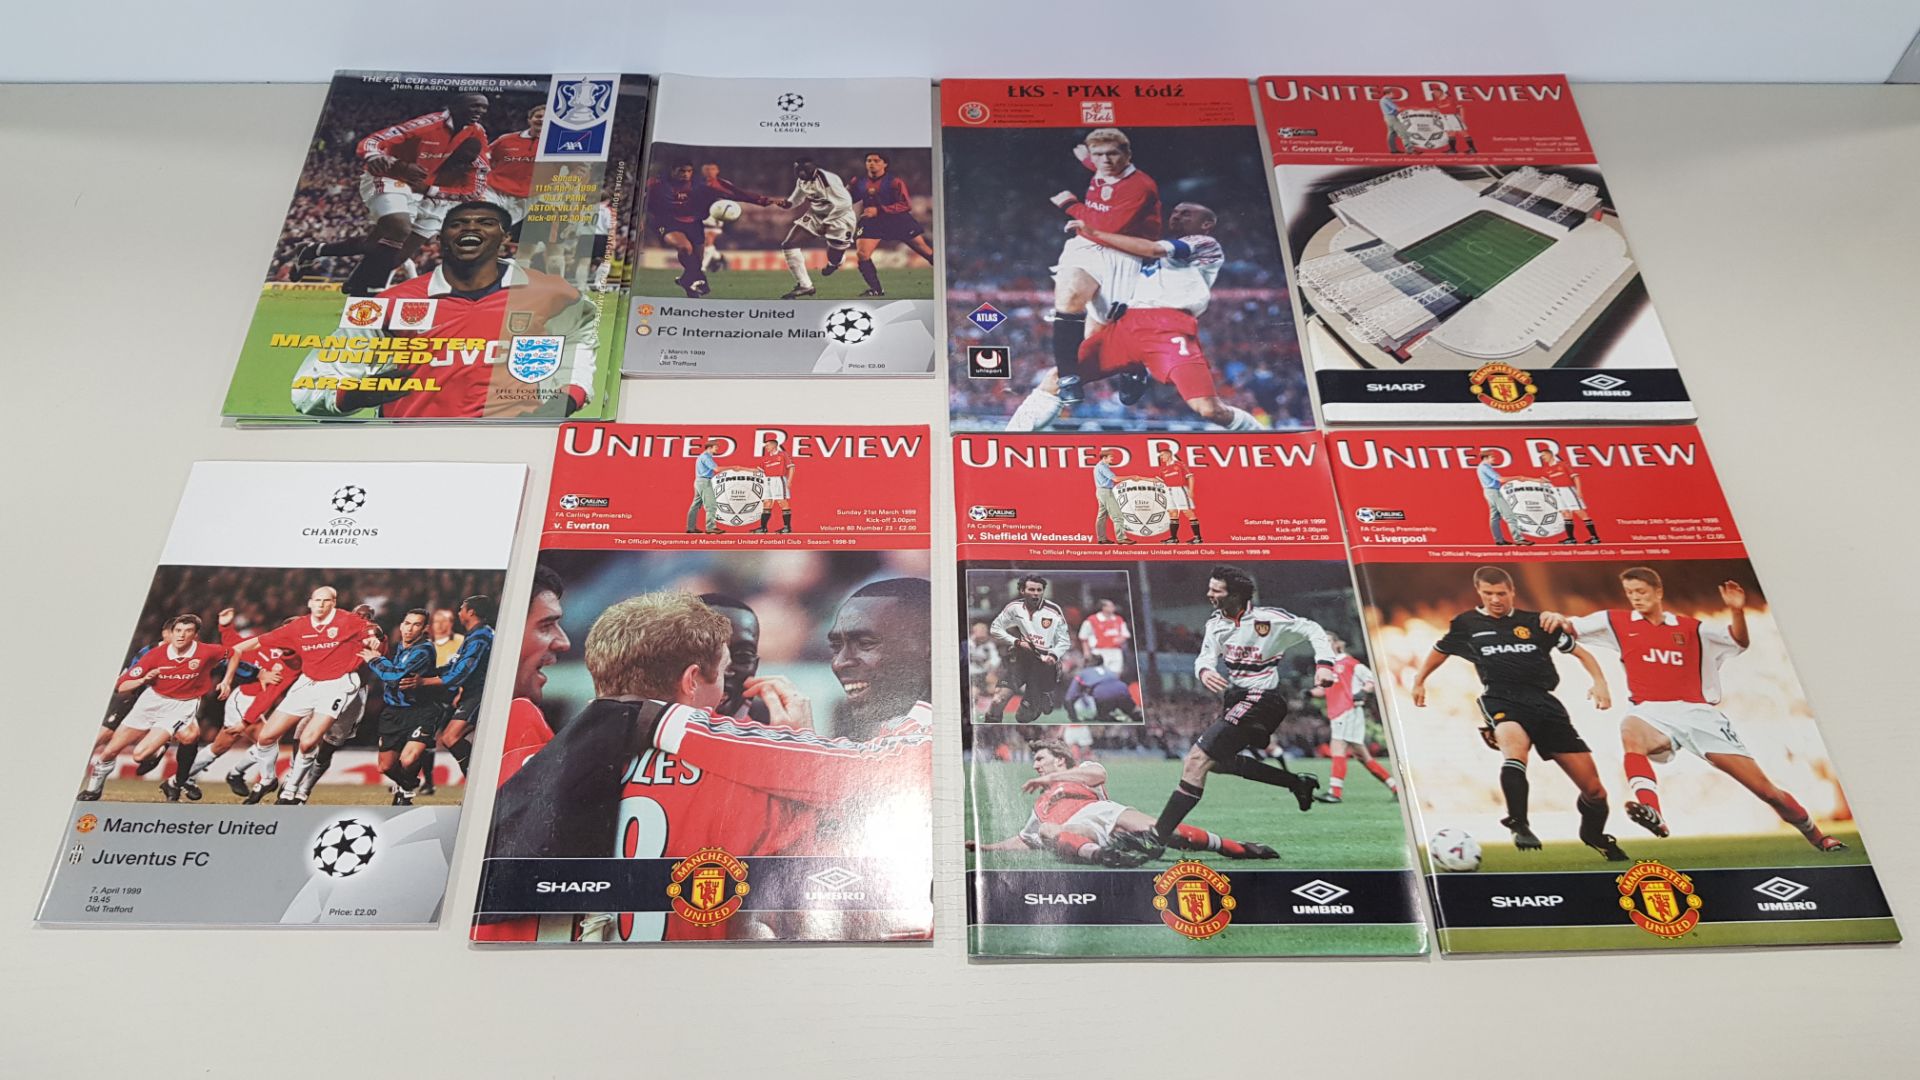 COMPLETE COLLECTION OF MANCHESTER UNITED HOME GAME PROGRAMS FROM THE 1998/99 TREBLE WINNING SEASON